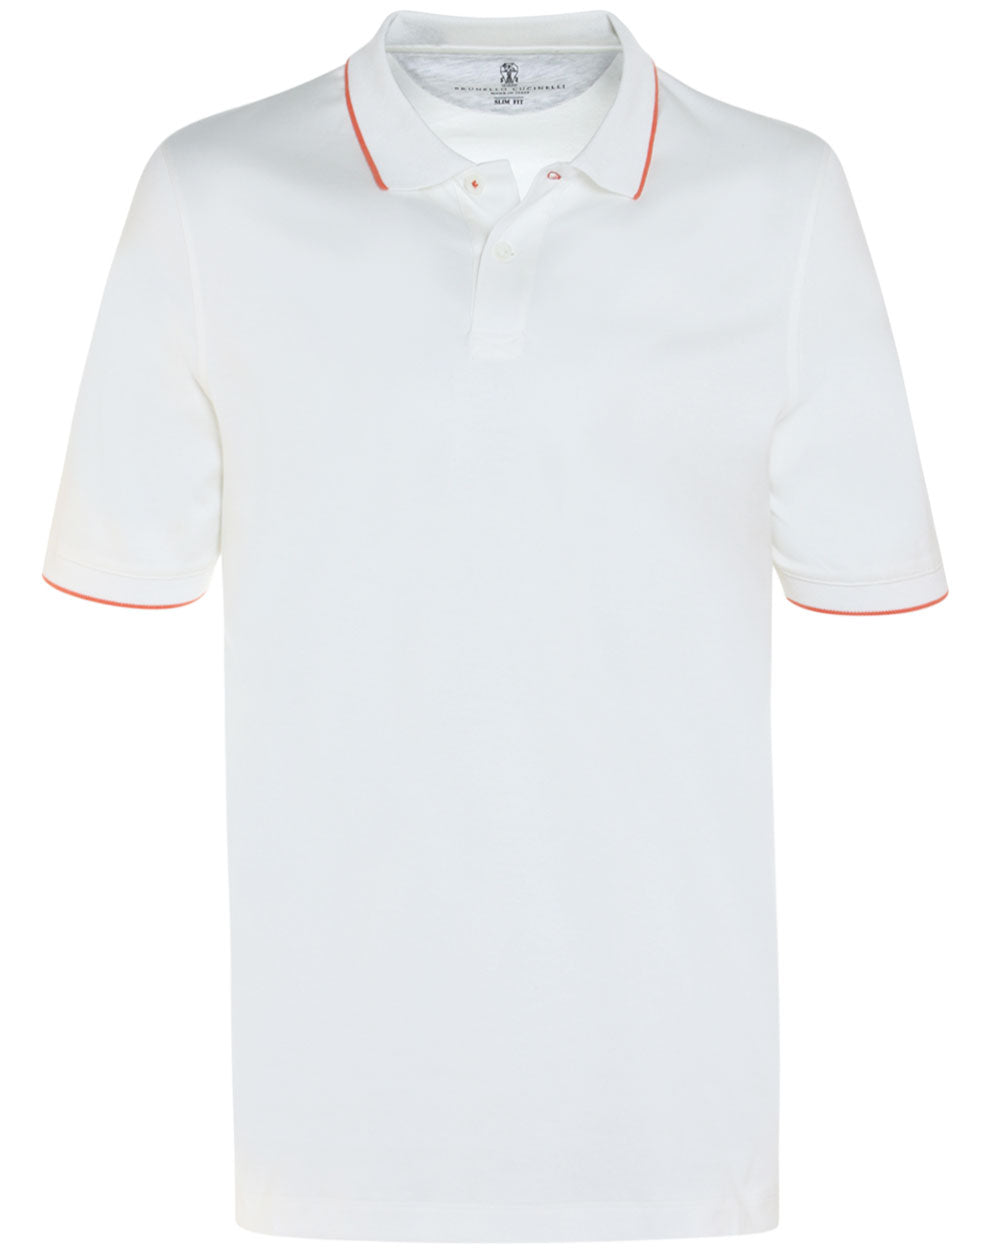 White and Orange Cotton Contrast Trim Short Sleeve Polo